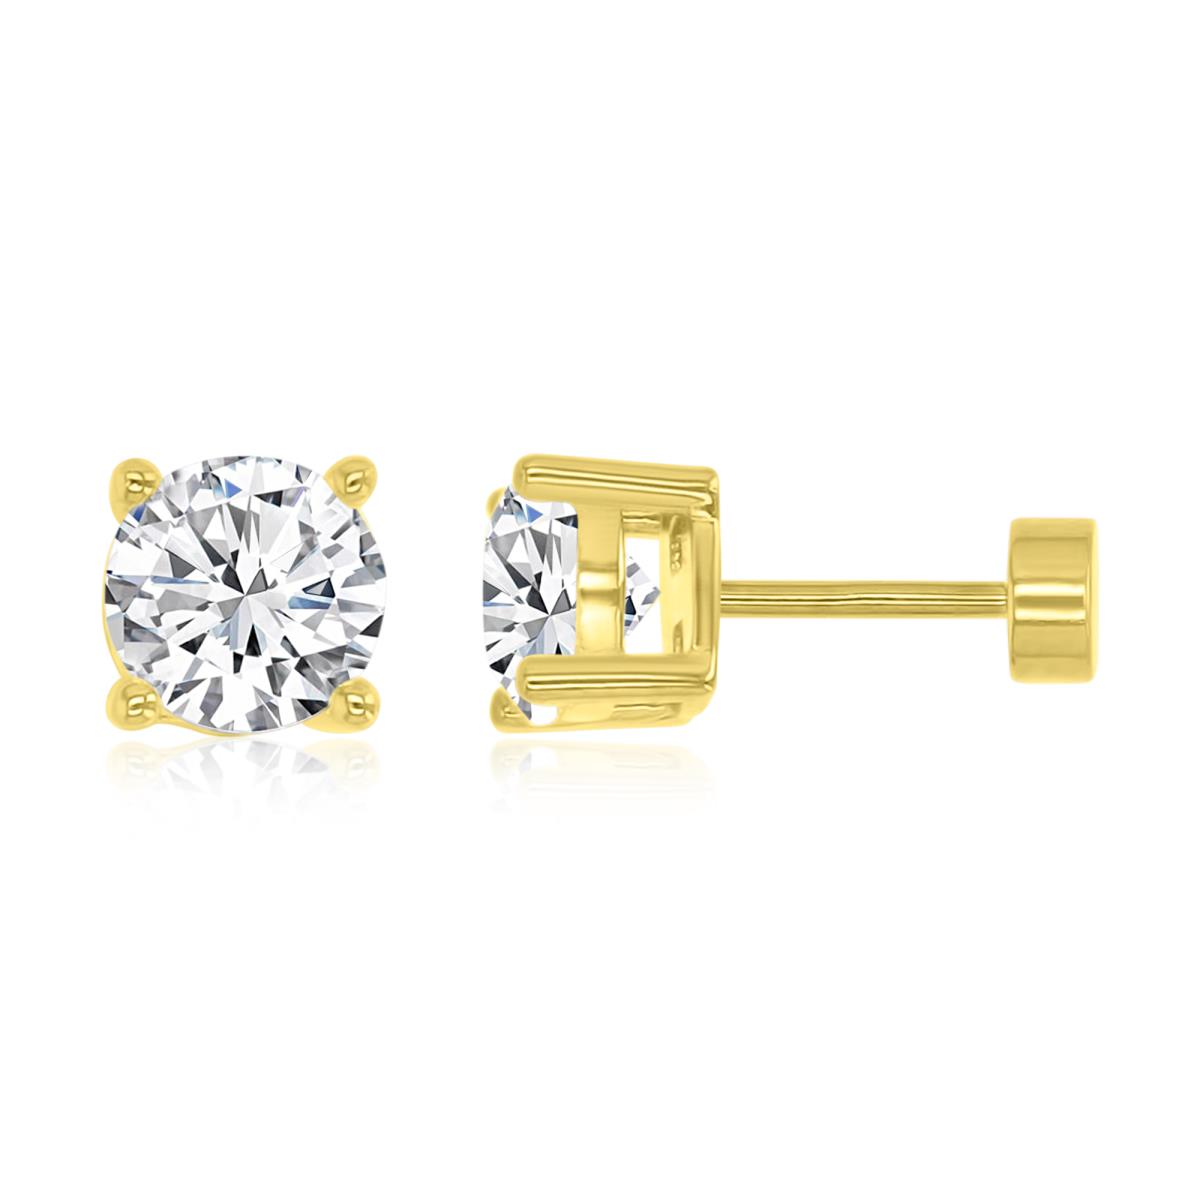 14K Yellow Gold 5.00mm AAA Round Solitaire Flat Back Stud Earrings